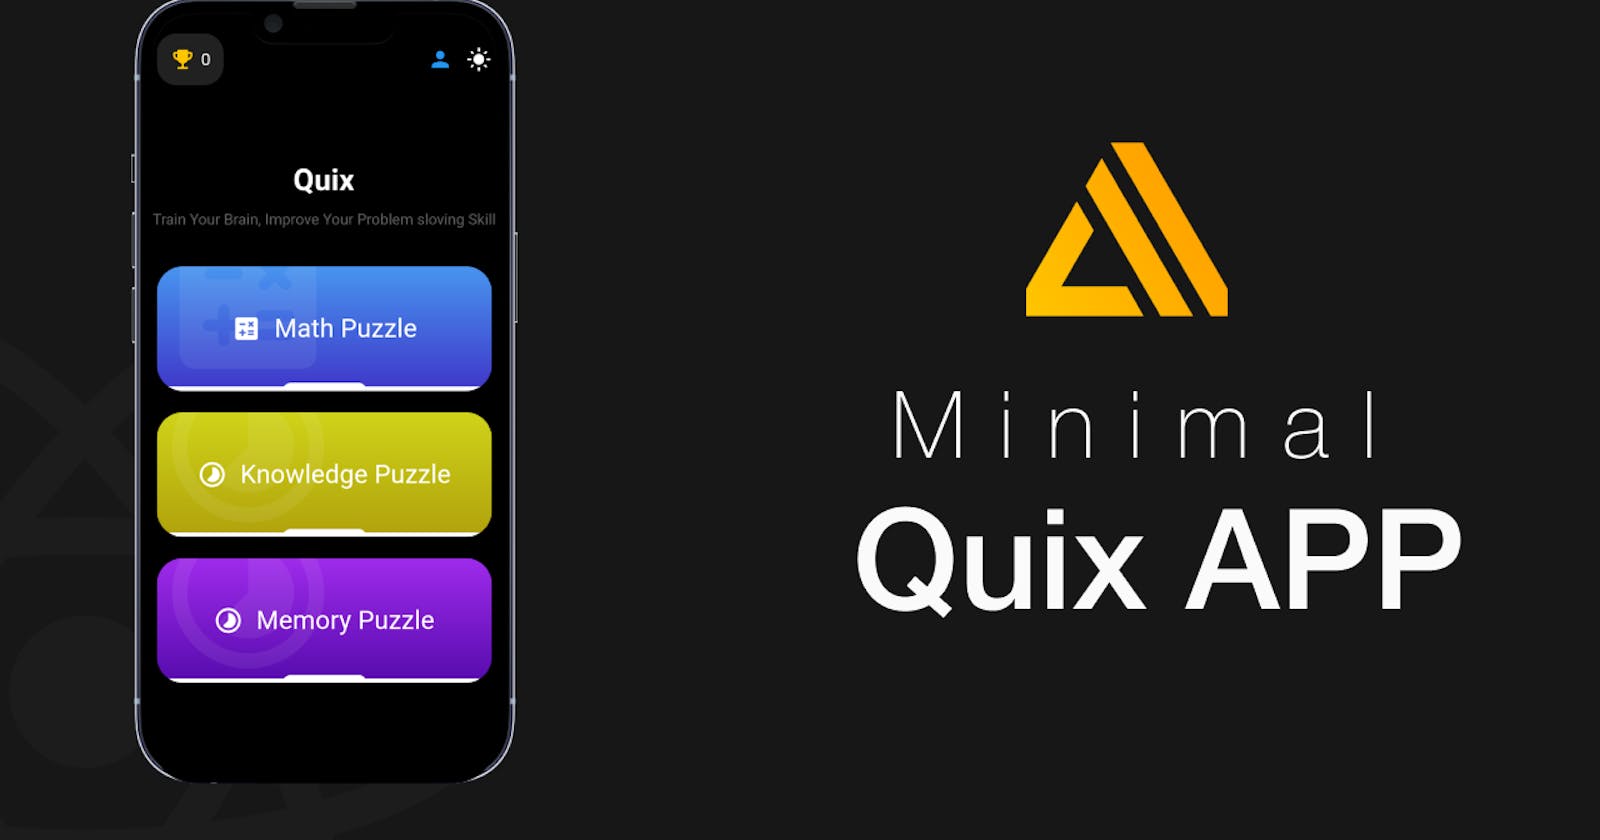 Introducing Quix! : A simple quiz application to test your knowledge and math skills